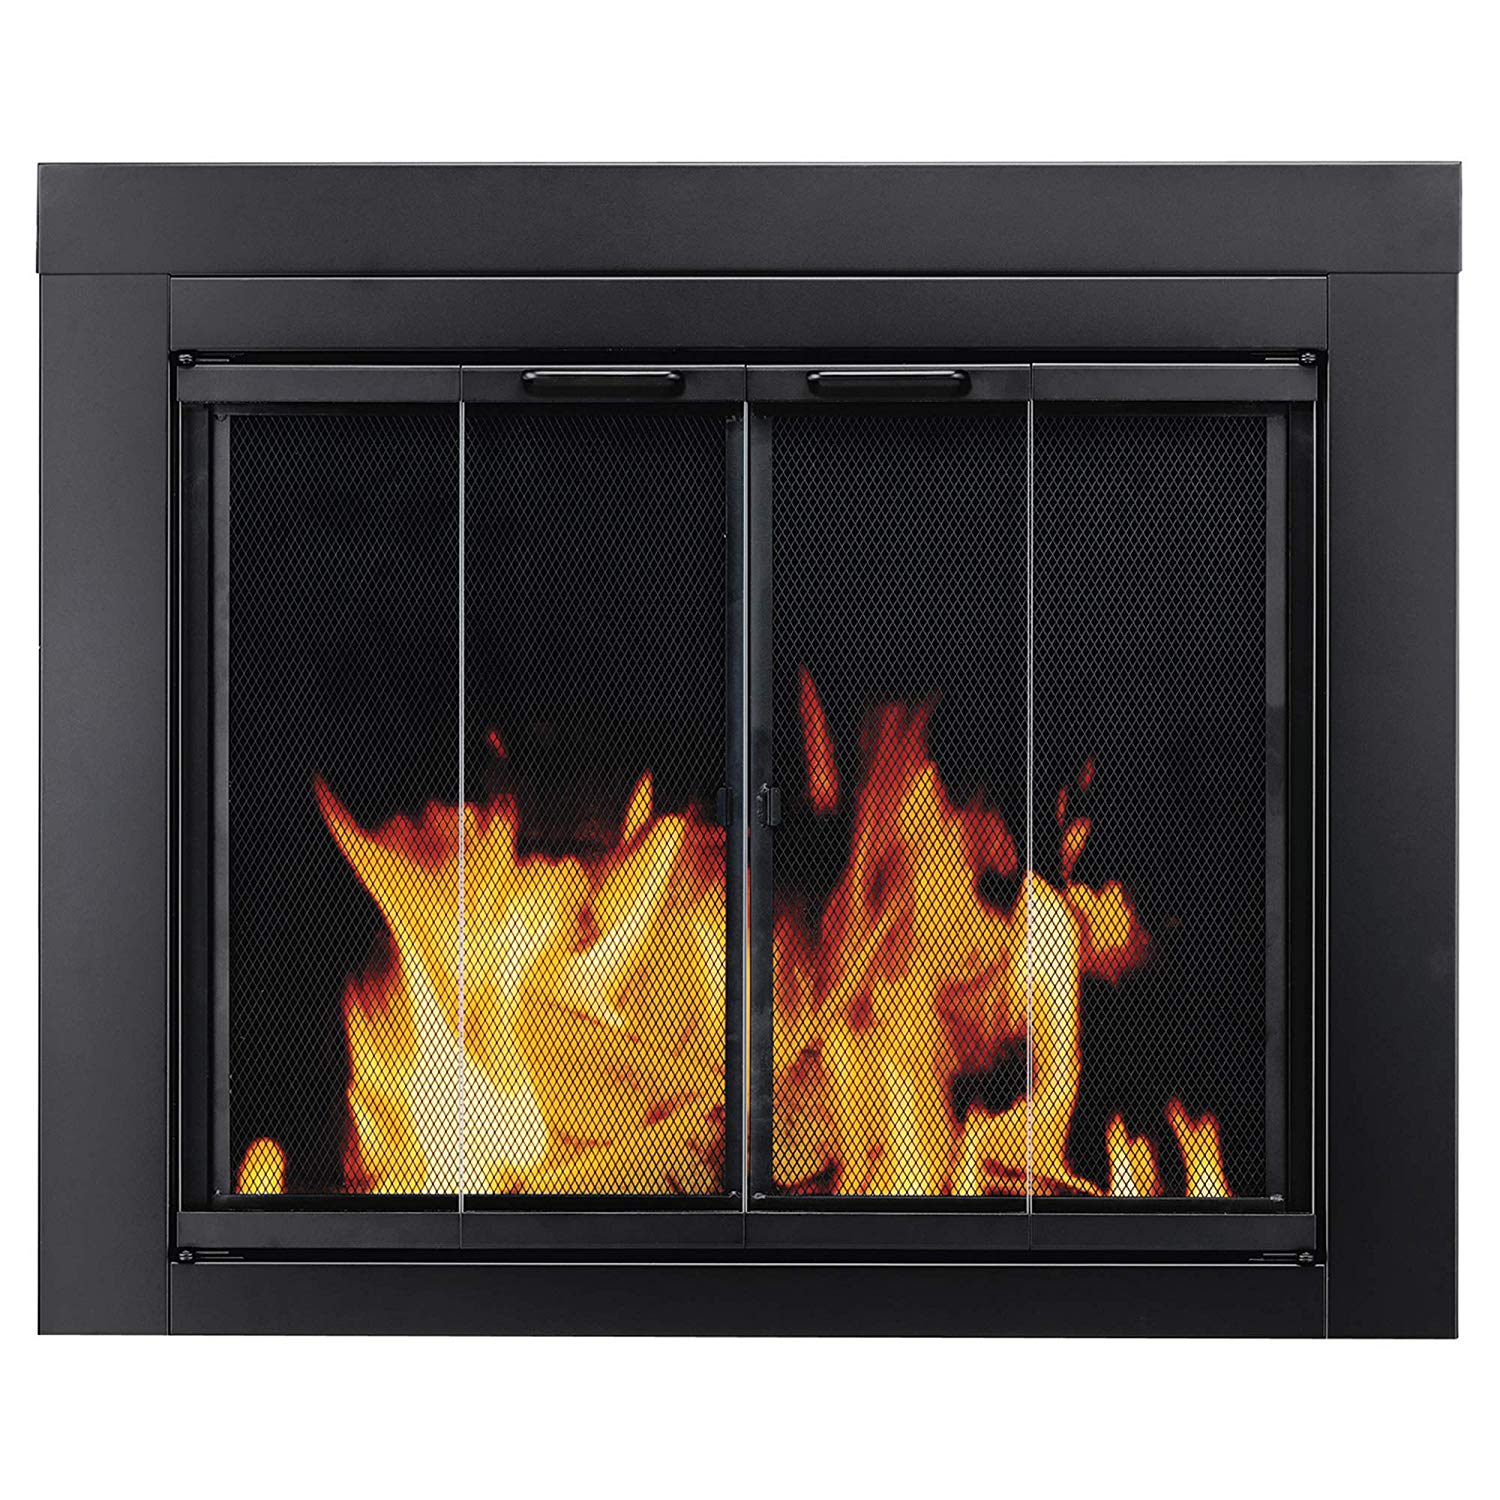 Decorative Gas Fireplace New Pleasant Hearth at 1000 ascot Fireplace Glass Door Black Small